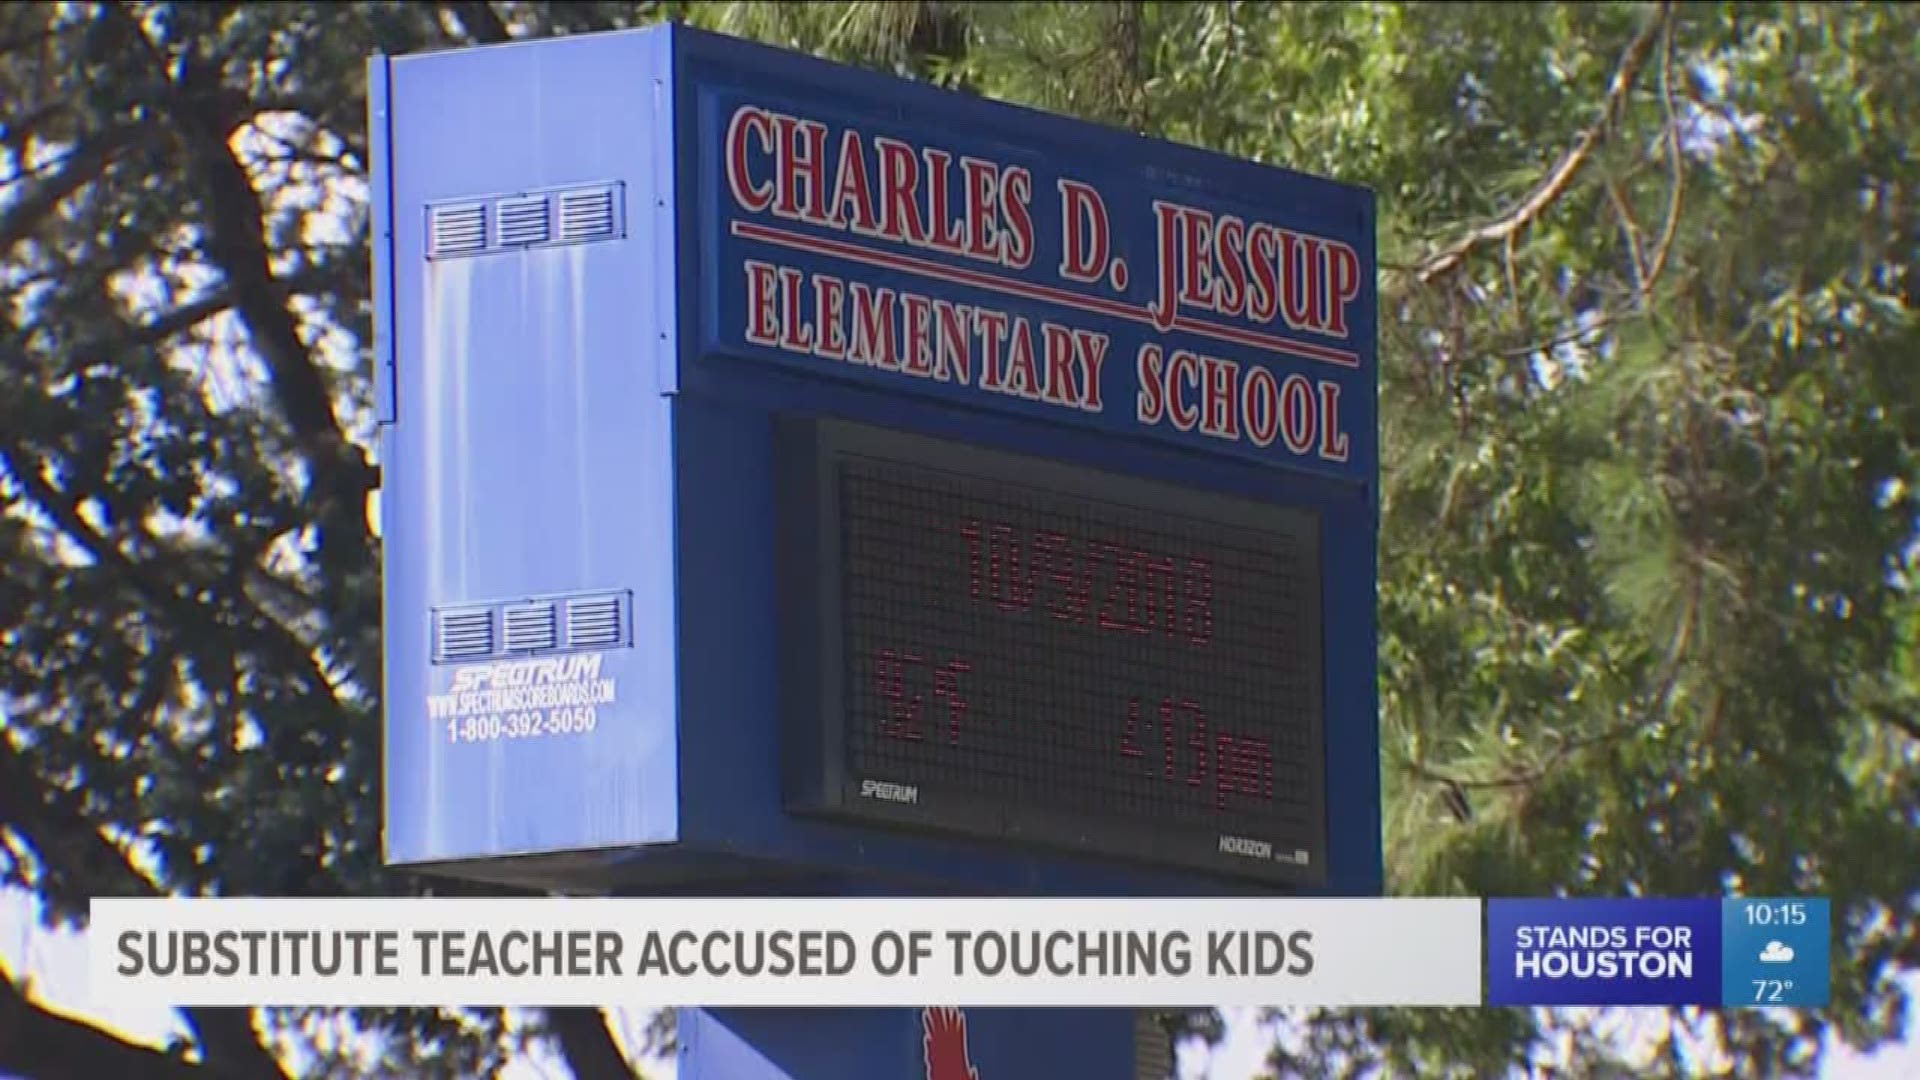 A mother is furious after she says her daughter told her a 4th grade substitute teacher touched her inappropriately. And other girls say it happened to them. 